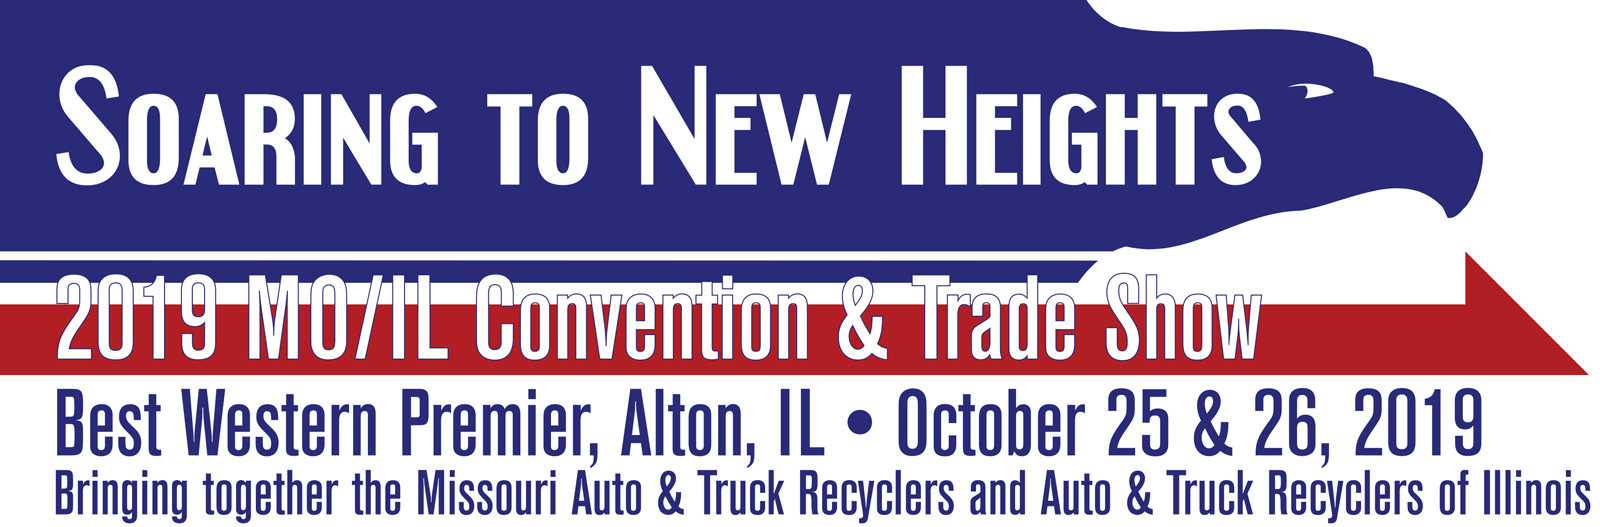 Soaring to New Heights - 2019 MO/IL Convention & Trade Show Oct. 25 & 26